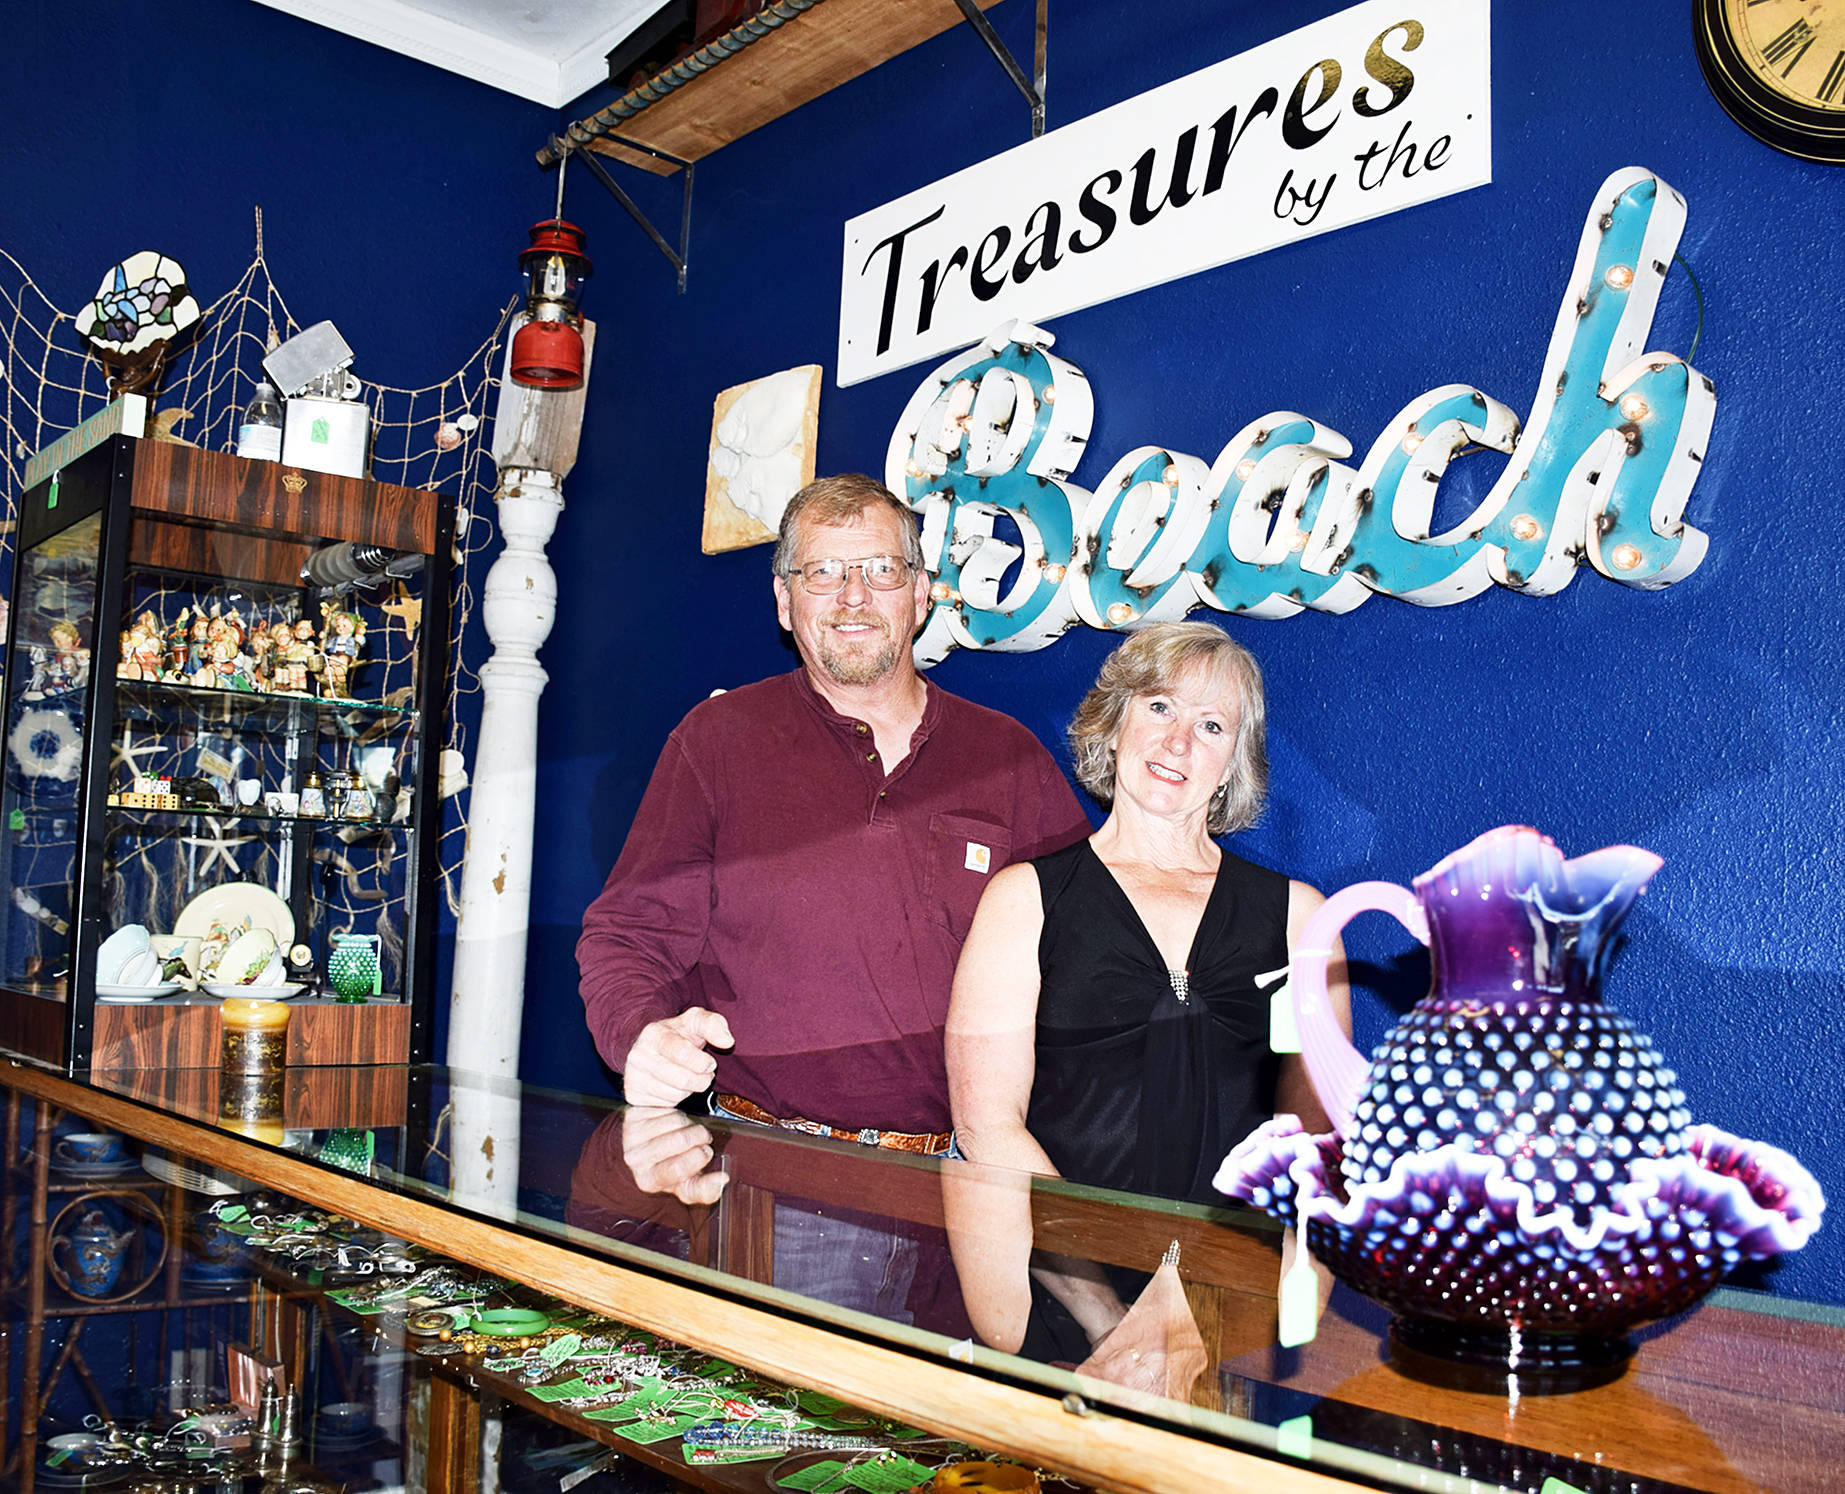 Robin and Clyde Mack of Treasures by the Beach at 877 Pt. Brown Ave. NE.